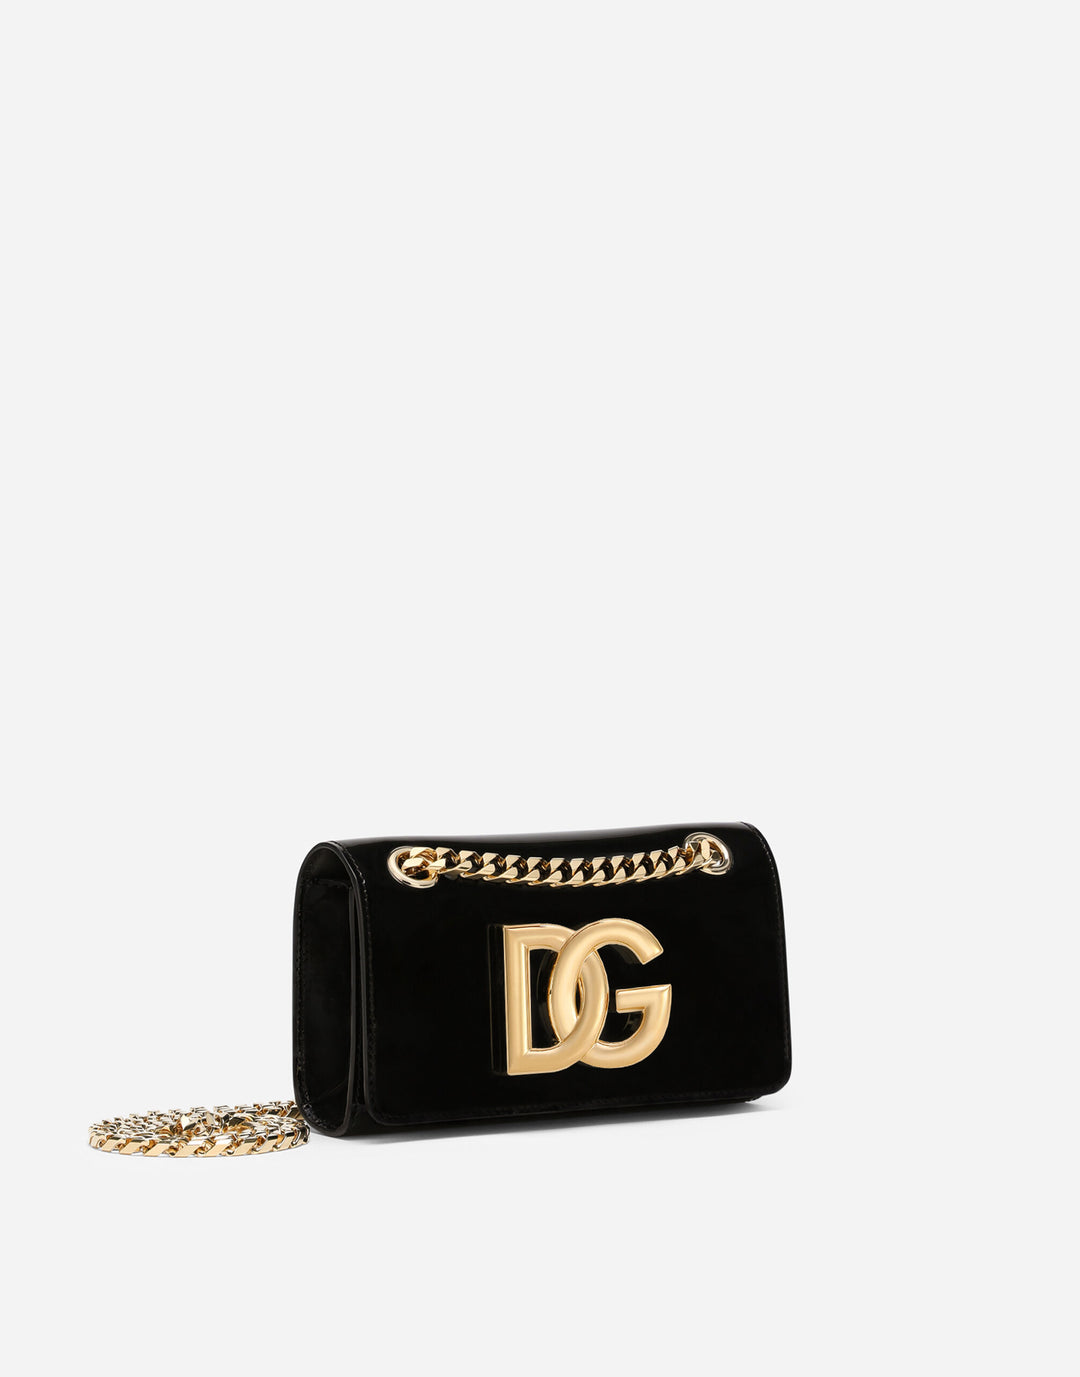 DOLCE & GABBANA Black & Gold Tone Logo 3.5 polished leather Phone Bag Veronique Luxury Collections